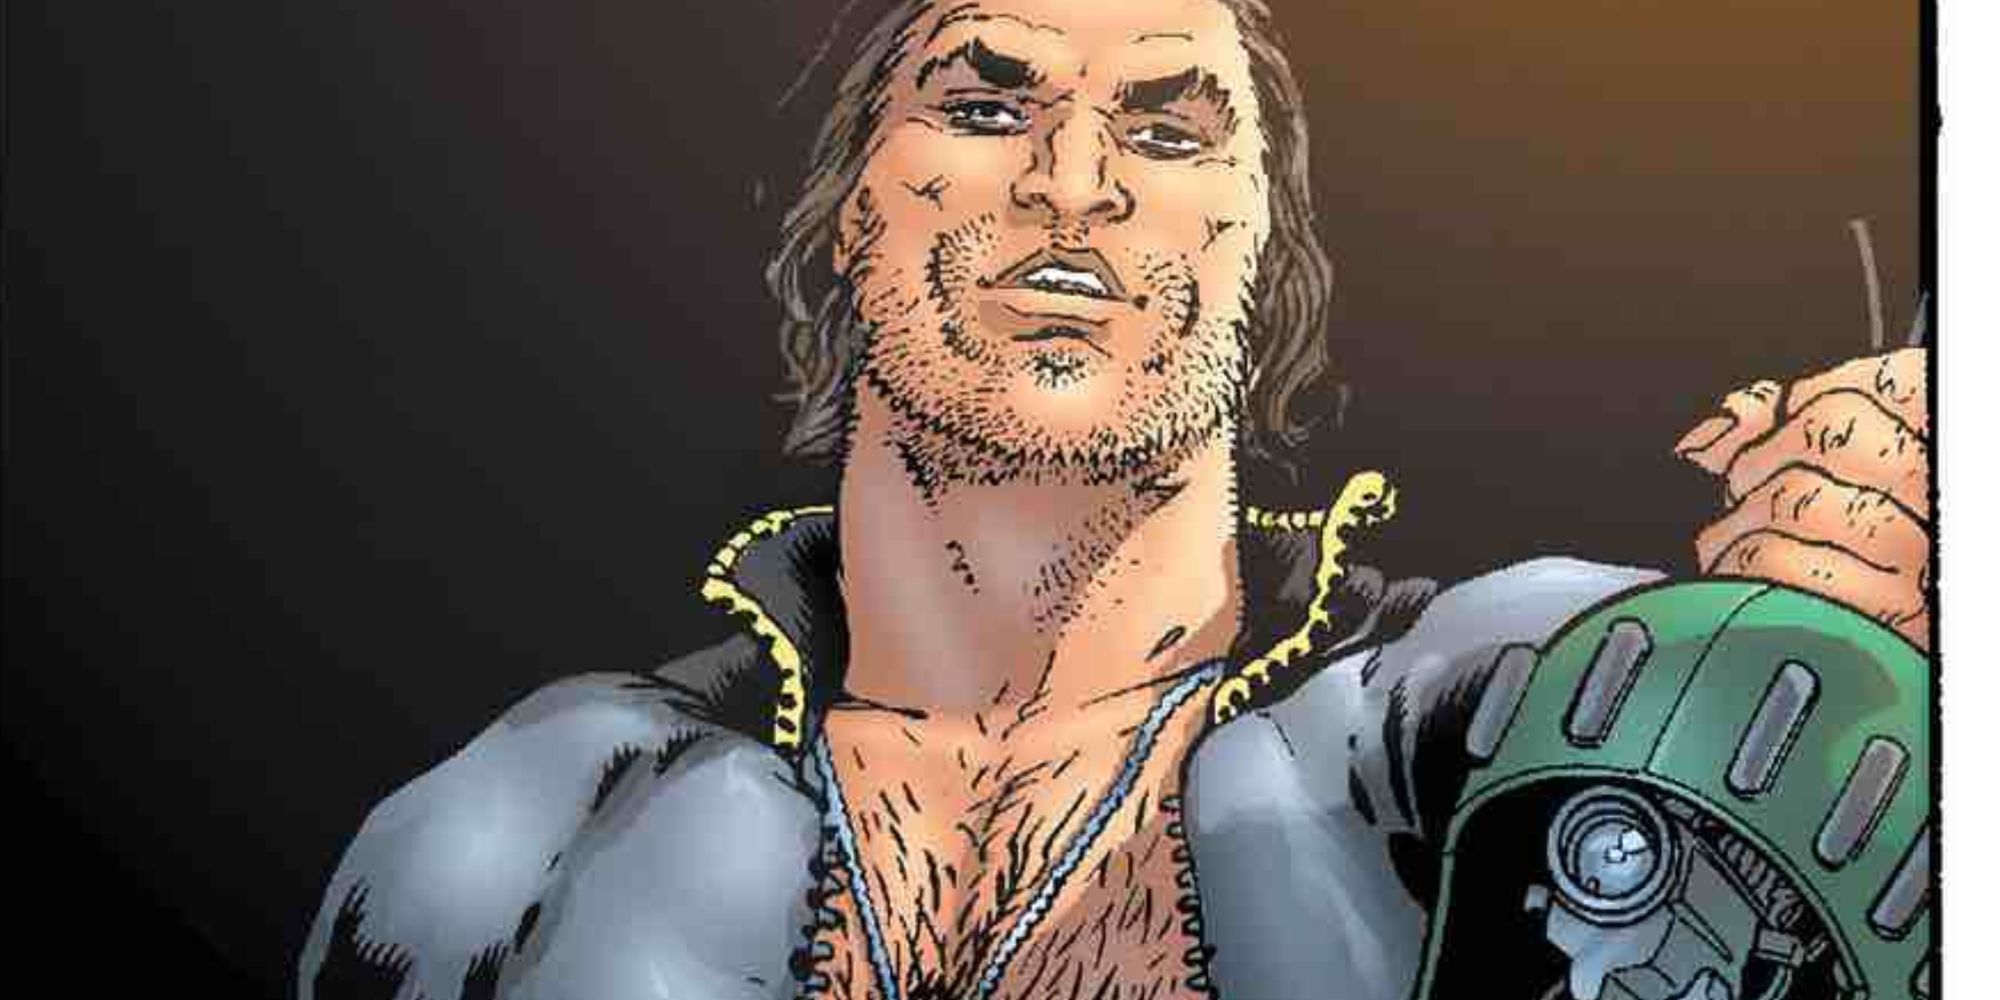 New X-Men's Wolverine by Frank Quitely in Marvel Comics